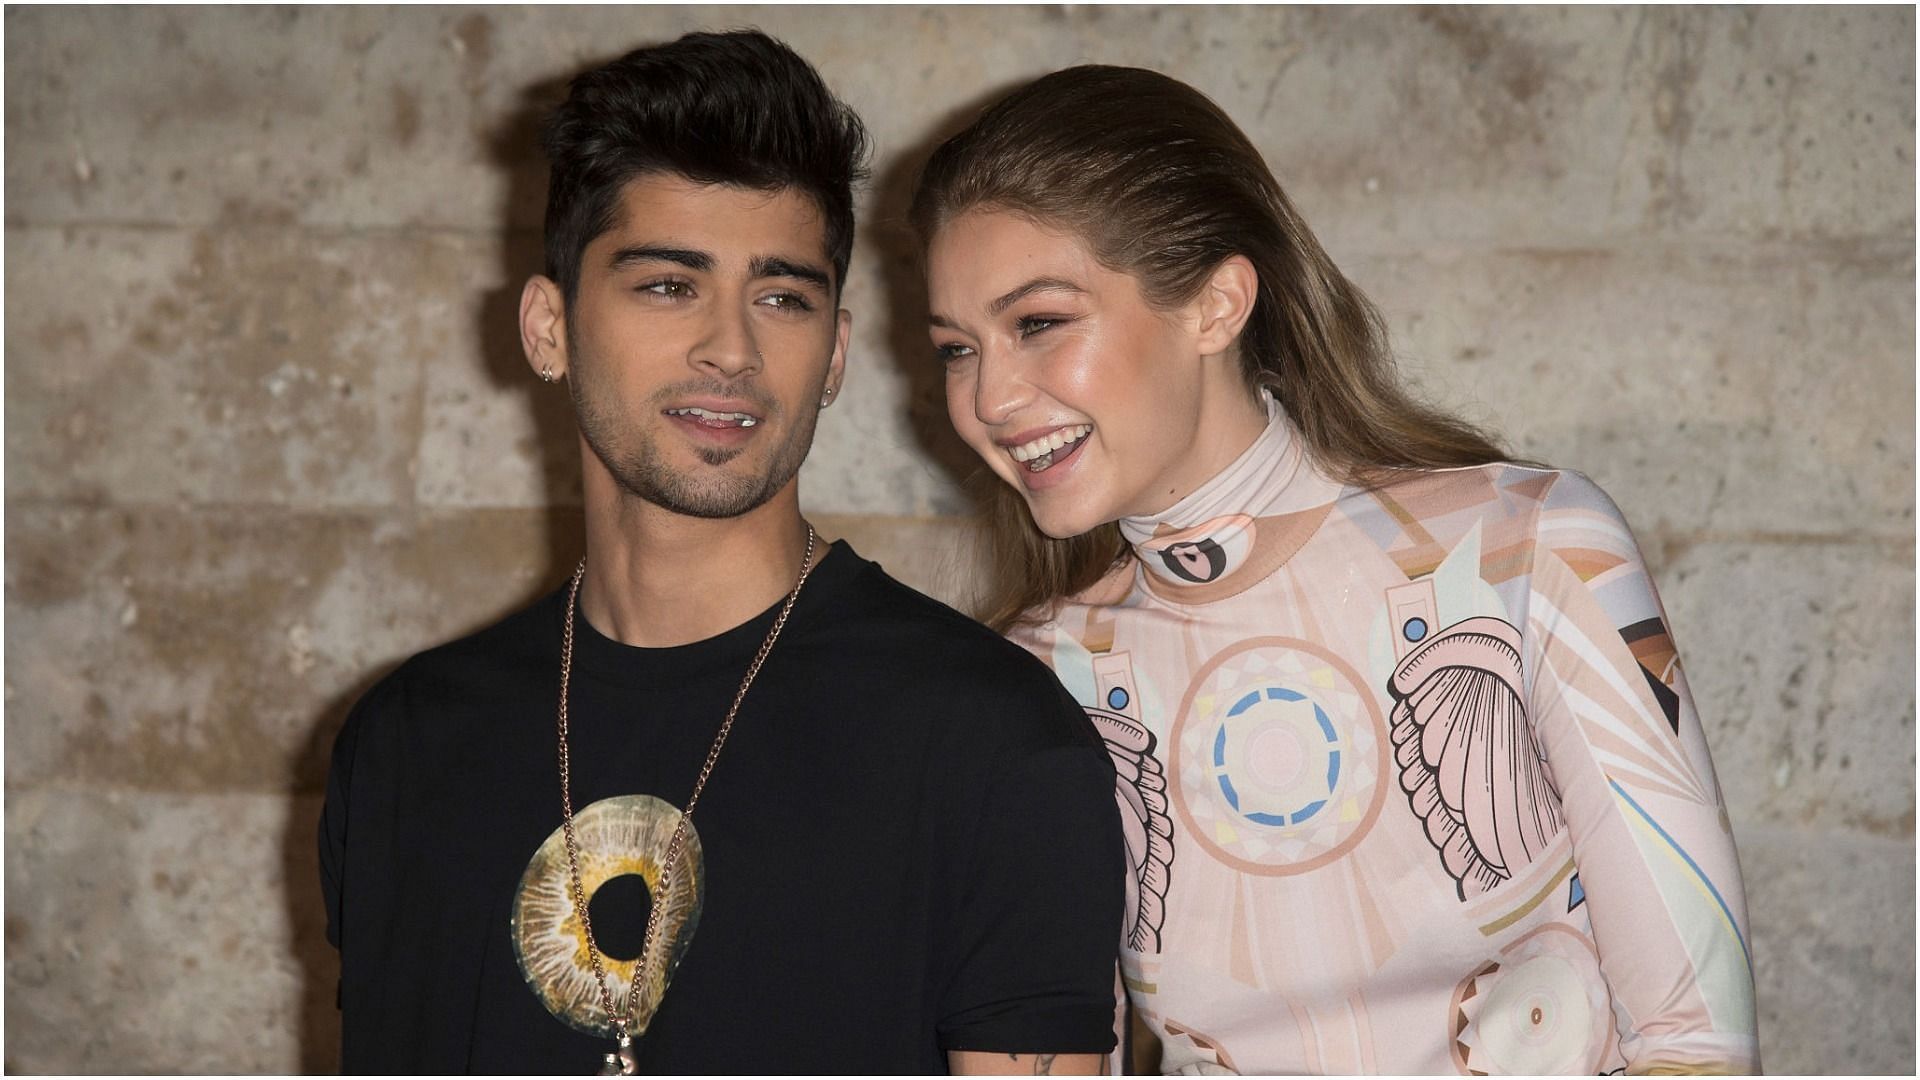 Zayn Malik and Gigi Hadid attend the Givenchy show as part of the Paris Fashion Week Womenswear Spring/Summer 2017 on October 2, 2016, in Paris, France (Image via Getty Images)